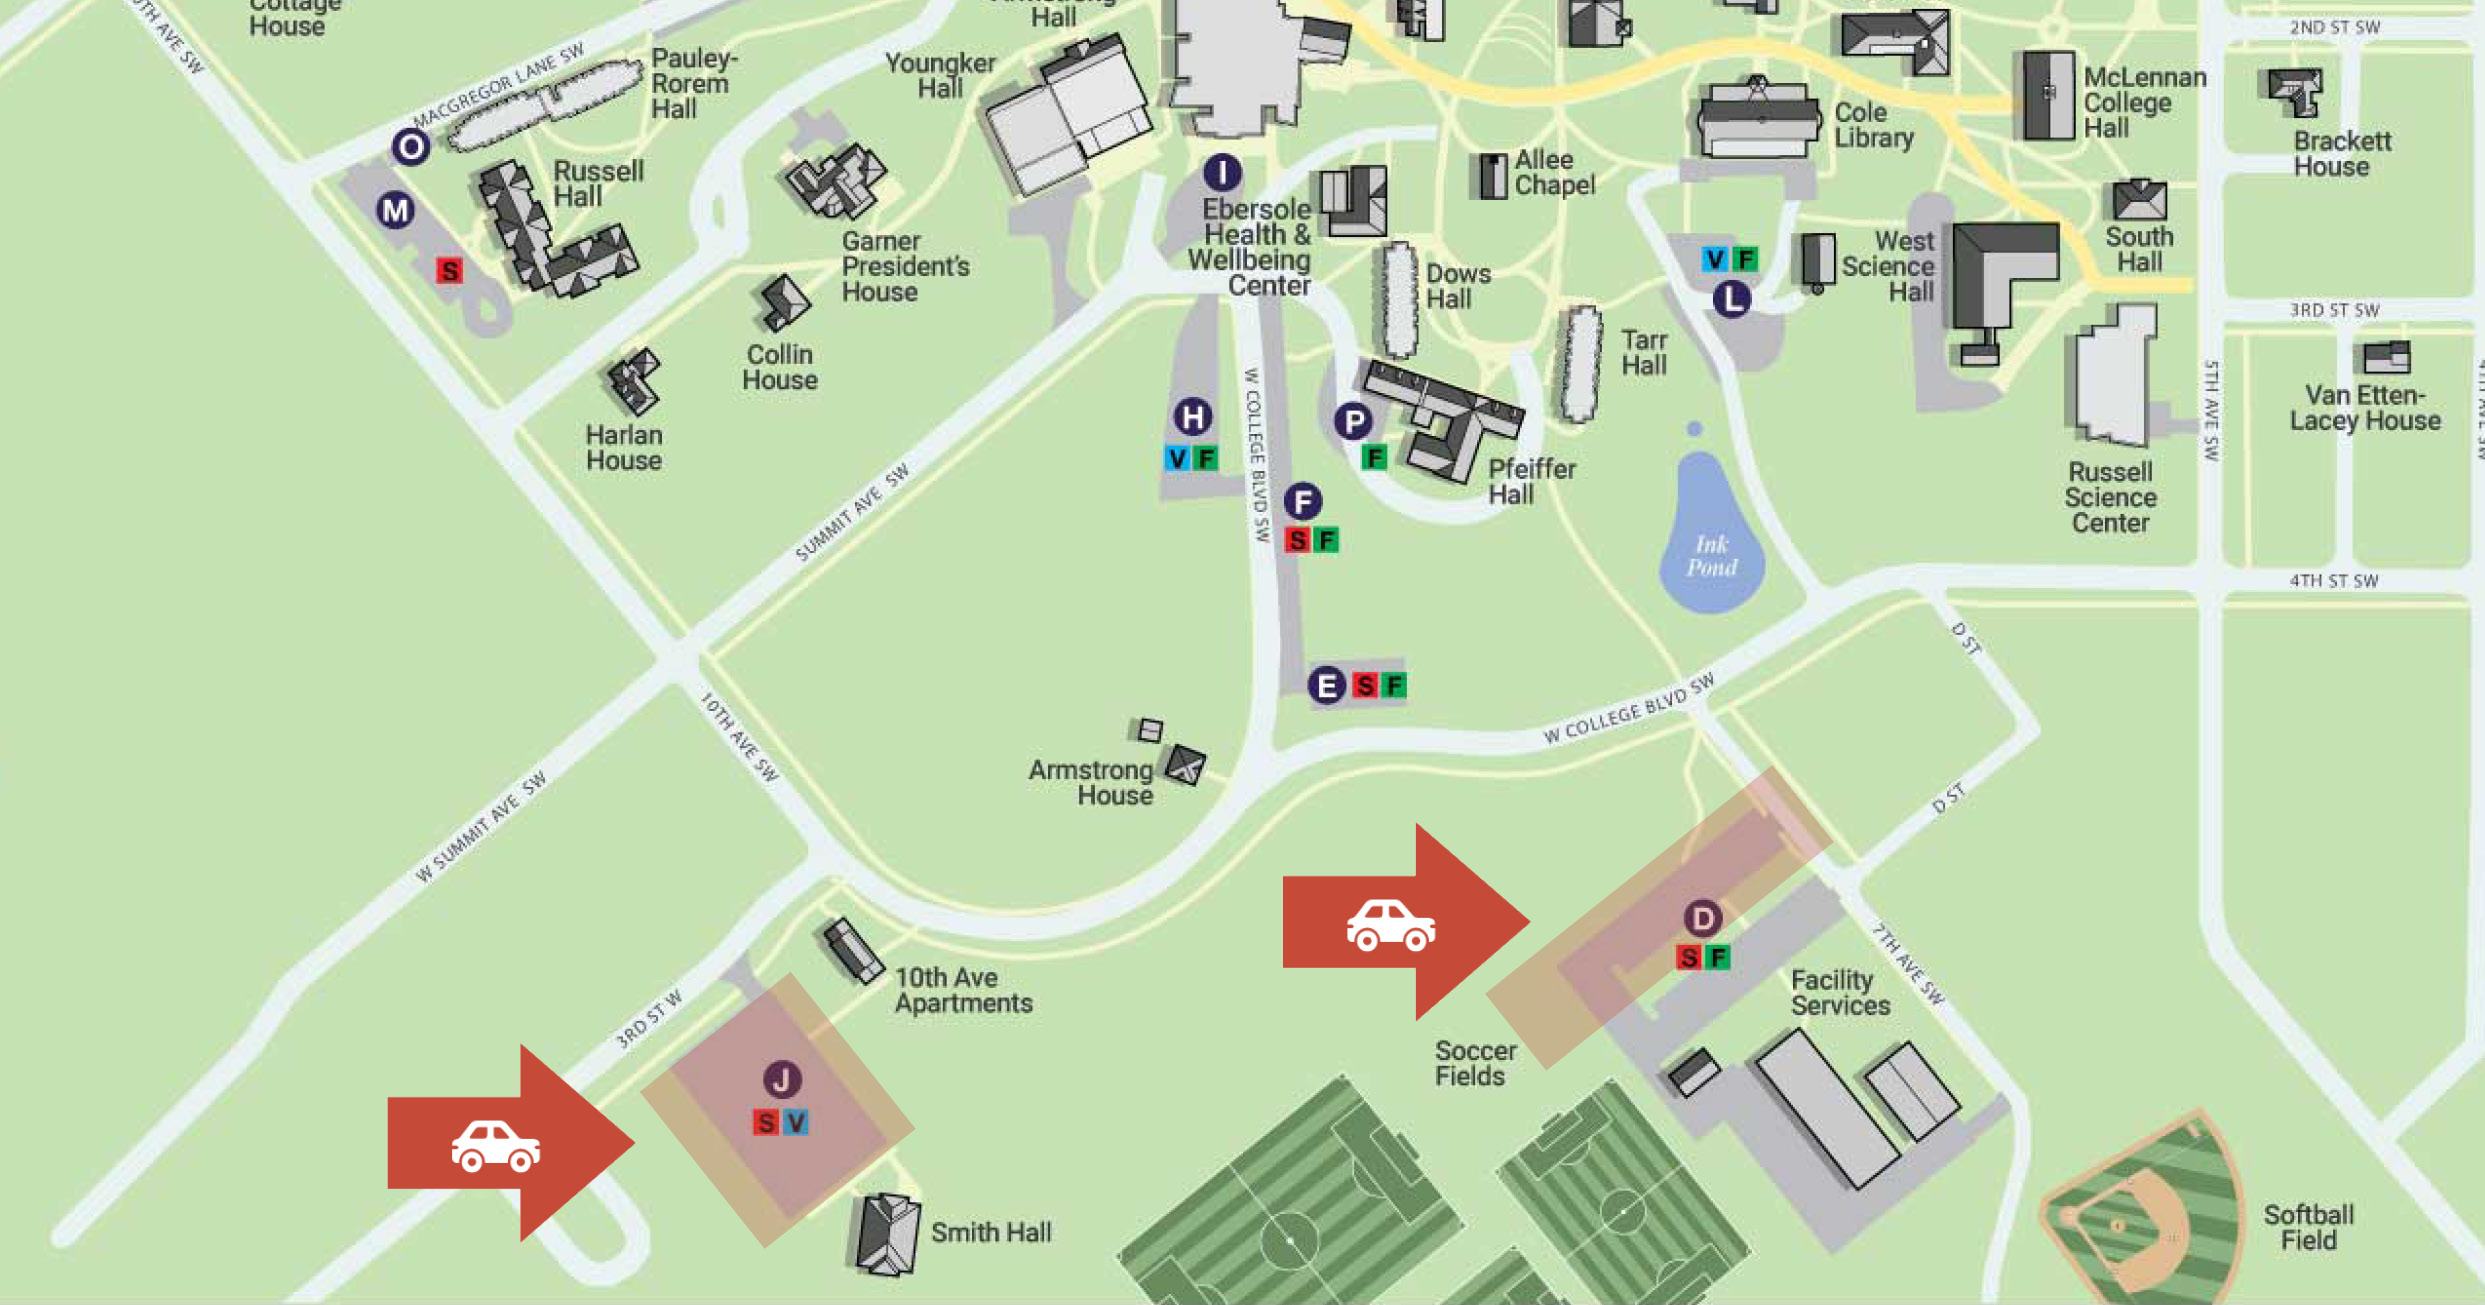 Campus map with winter break parking locations highlighted.